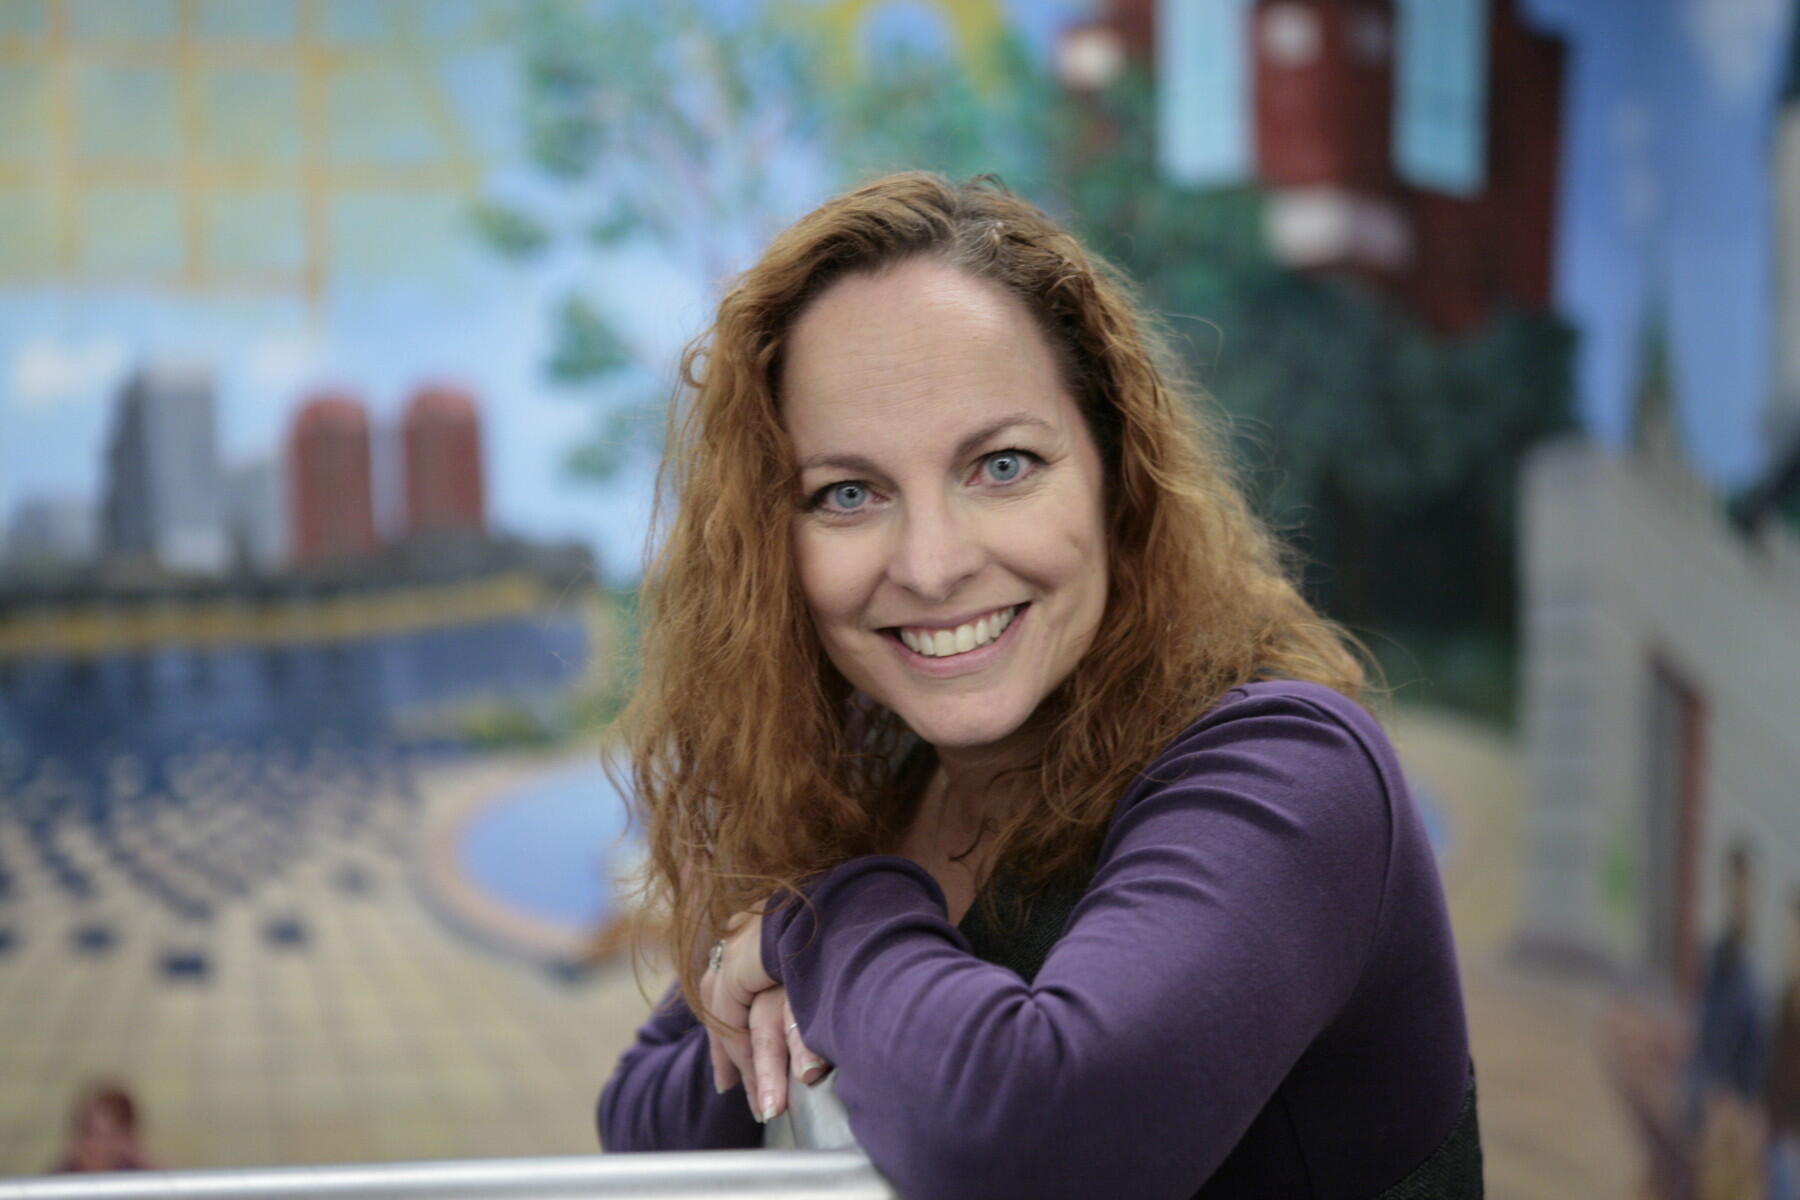 Woman smiling in front of a mural.